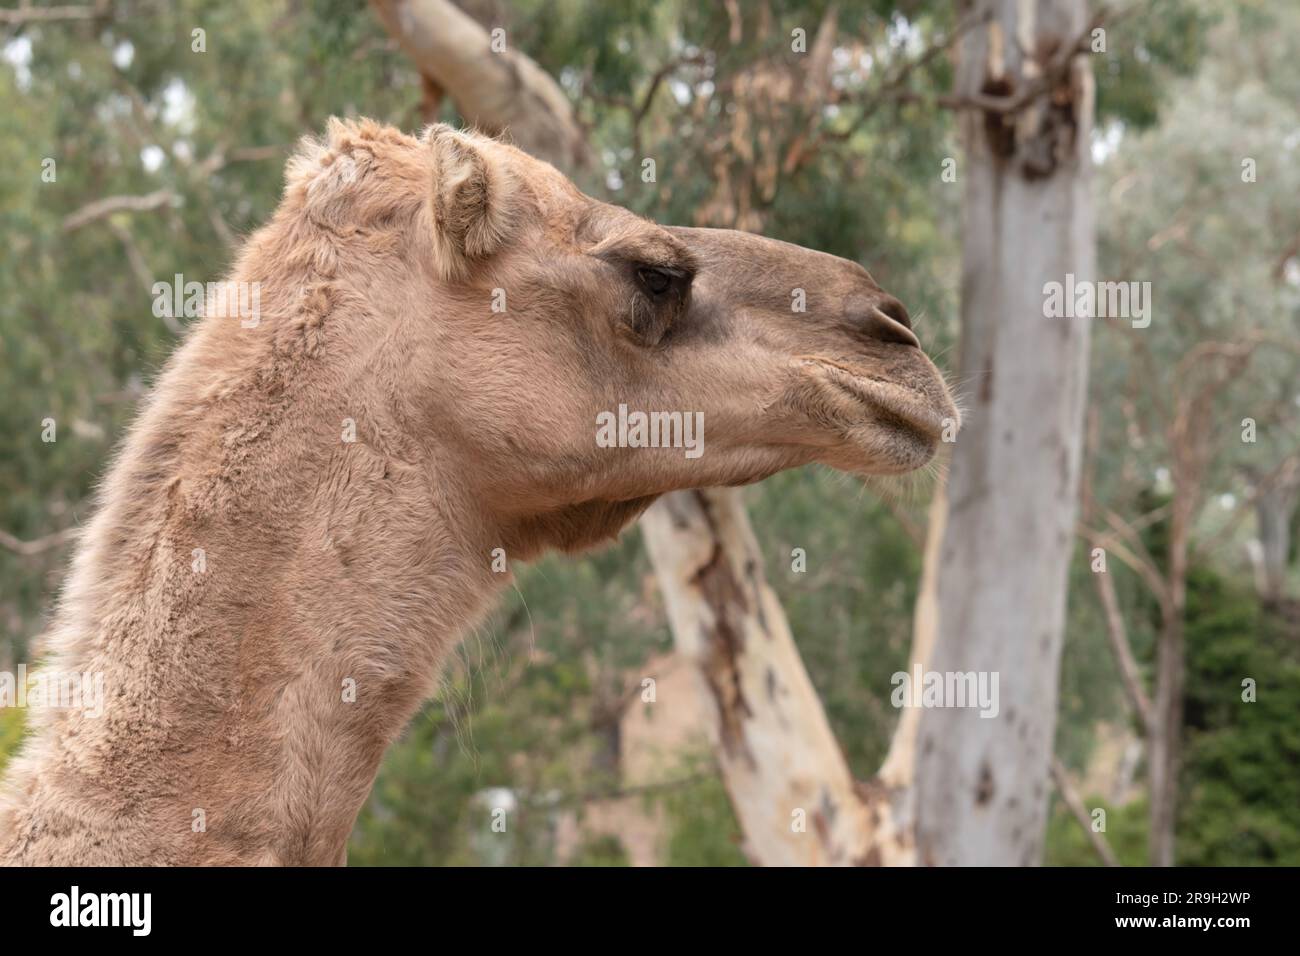 Camels are mammals with brown eyes, long lashes,  a big-lipped snout and a humped back. Stock Photo